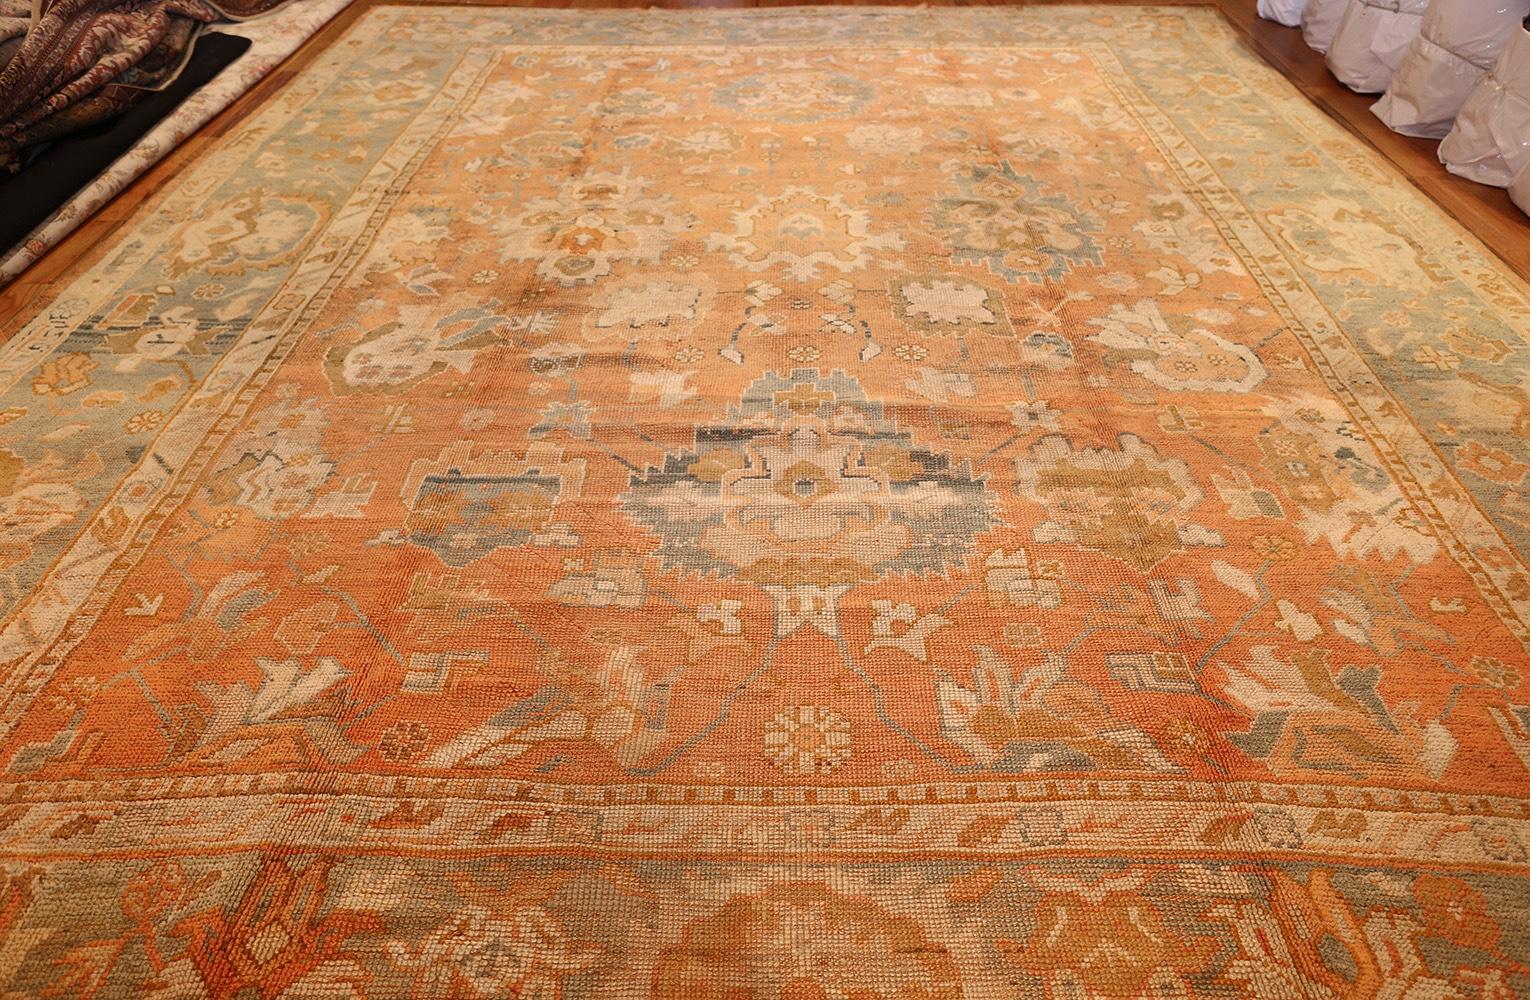 Antique Turkish Oushak rug, country of origin: Turkey, date circa early 20th century. Size: 11 ft. 7 in x 14 ft. 7 in (3.53 m x 4.44 m)

This rug is a wonderful example of Classic Oushak weaving with large, rectilinear motifs, soft colors and an